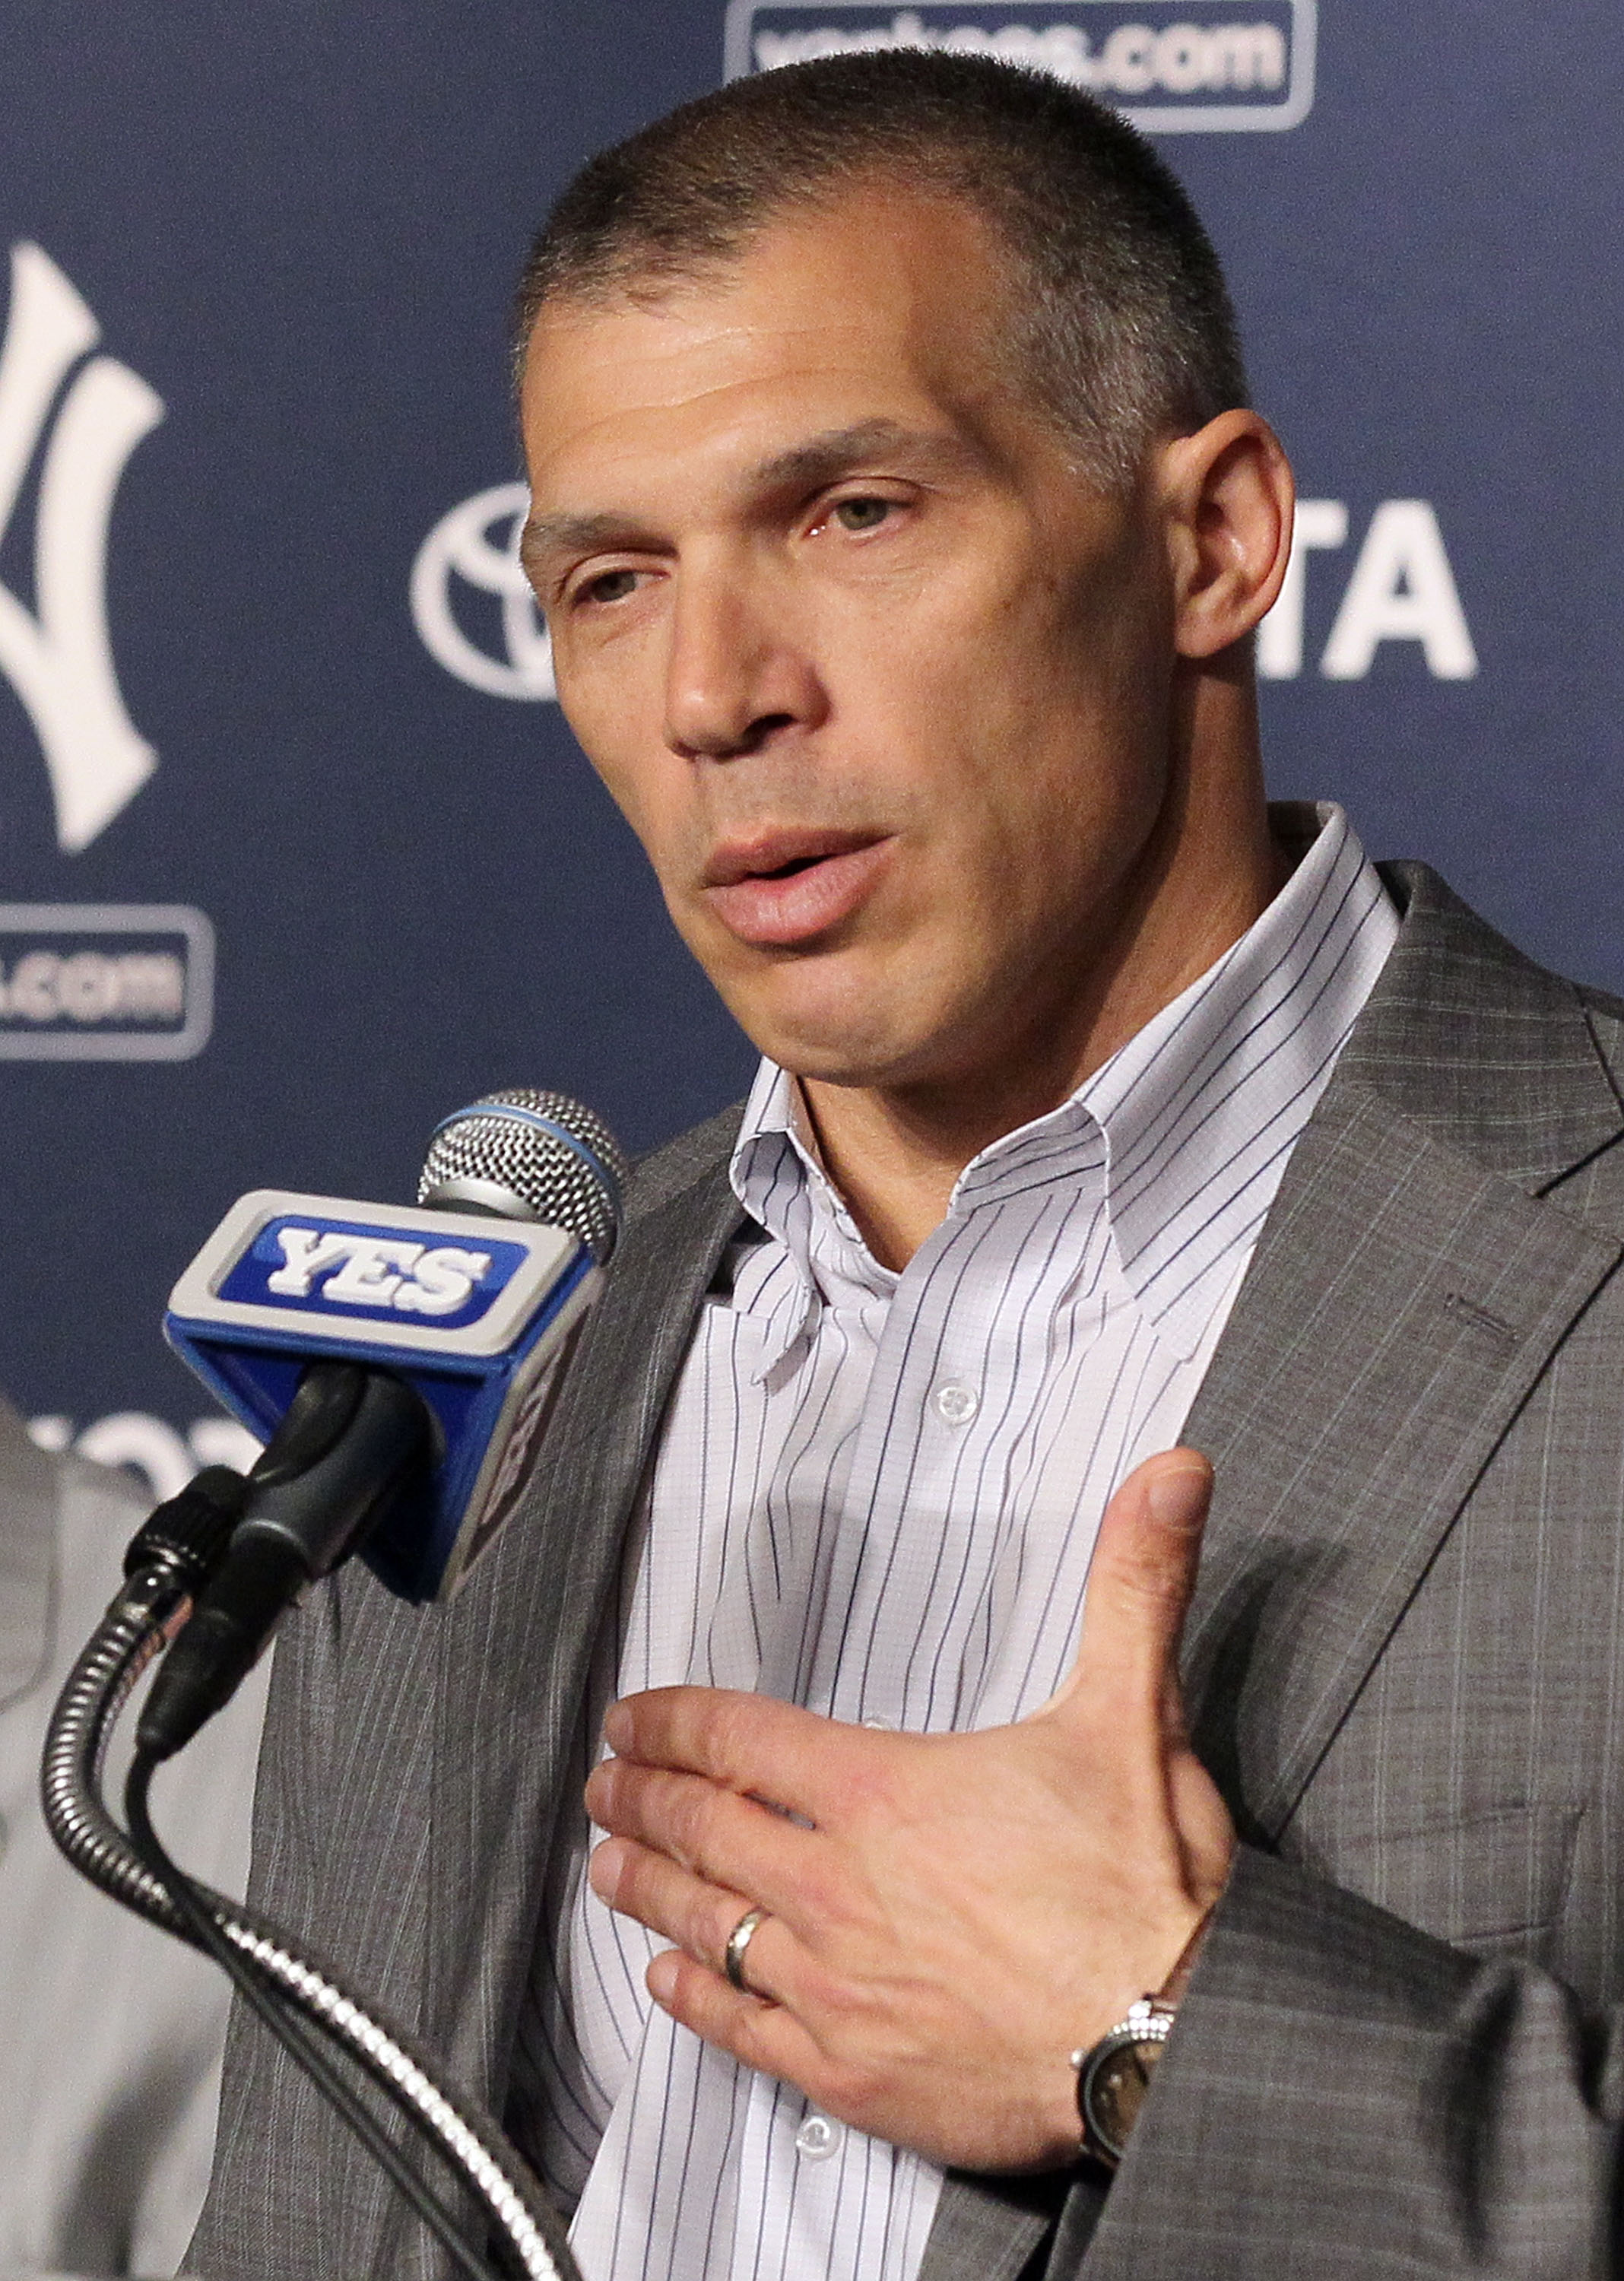 NEW YORK, NY - JANUARY 19:  Manager Joe Girardi of the New York Yankees speaks during a press conference introducing Rafael Soriano (not pictured) on January 19, 2011 at Yankee Stadium in the Bronx borough of New York City. The Yankees signed Soriano to a